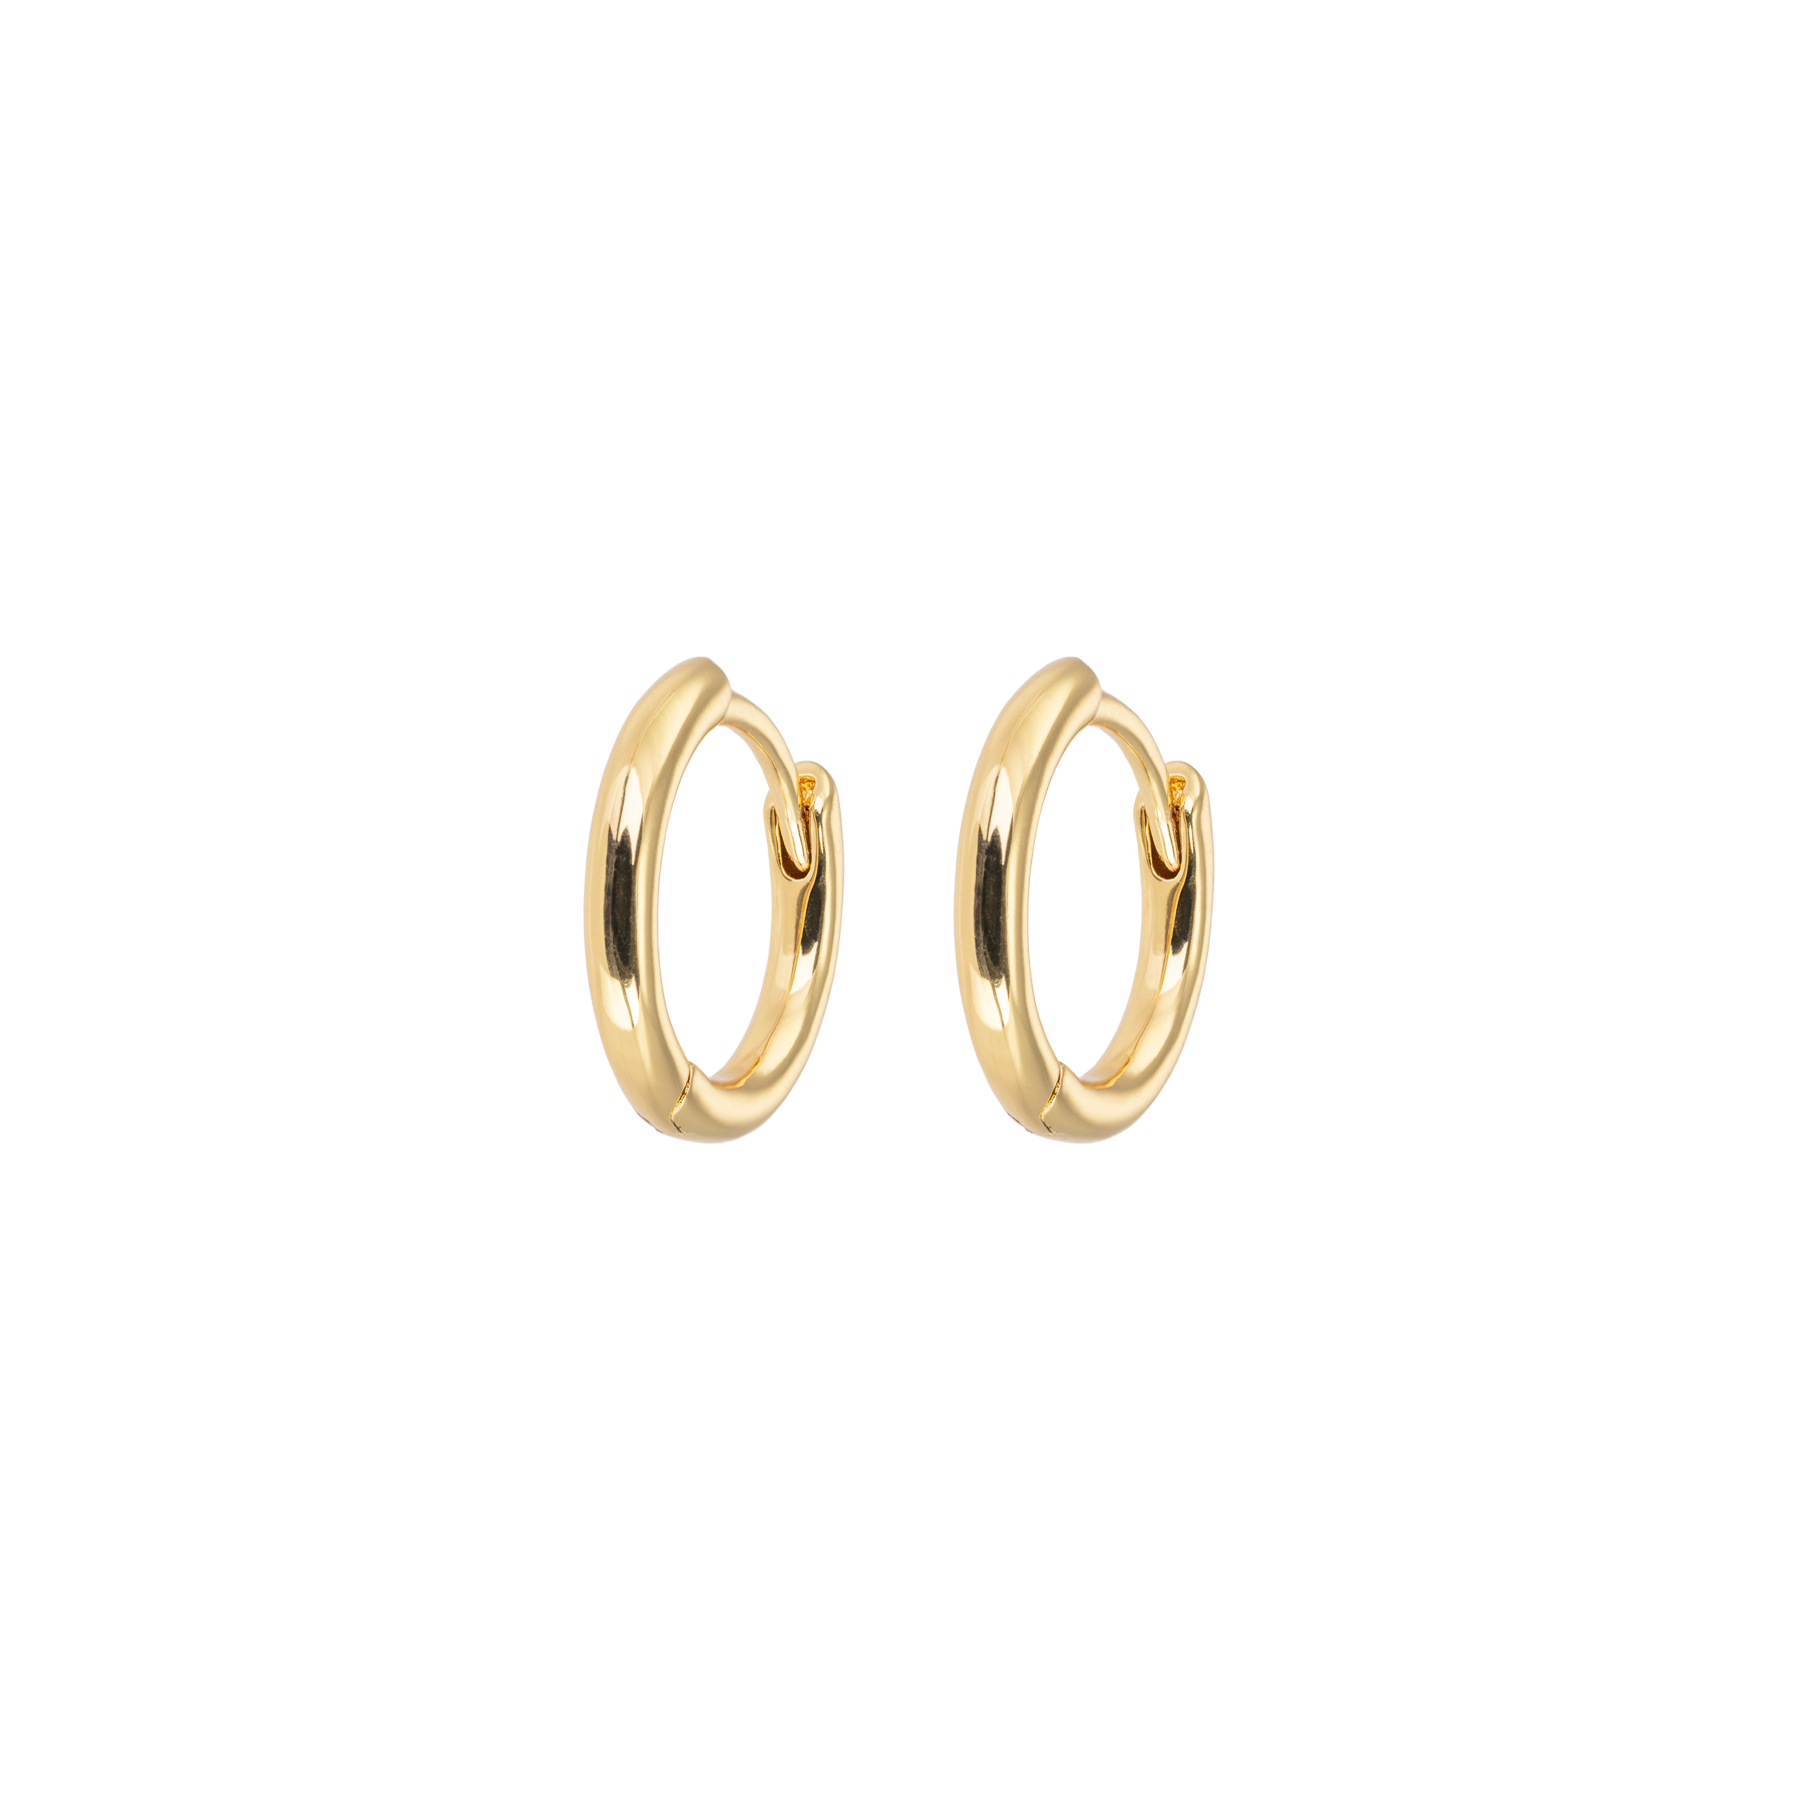 SMALL GOLD HOOPS